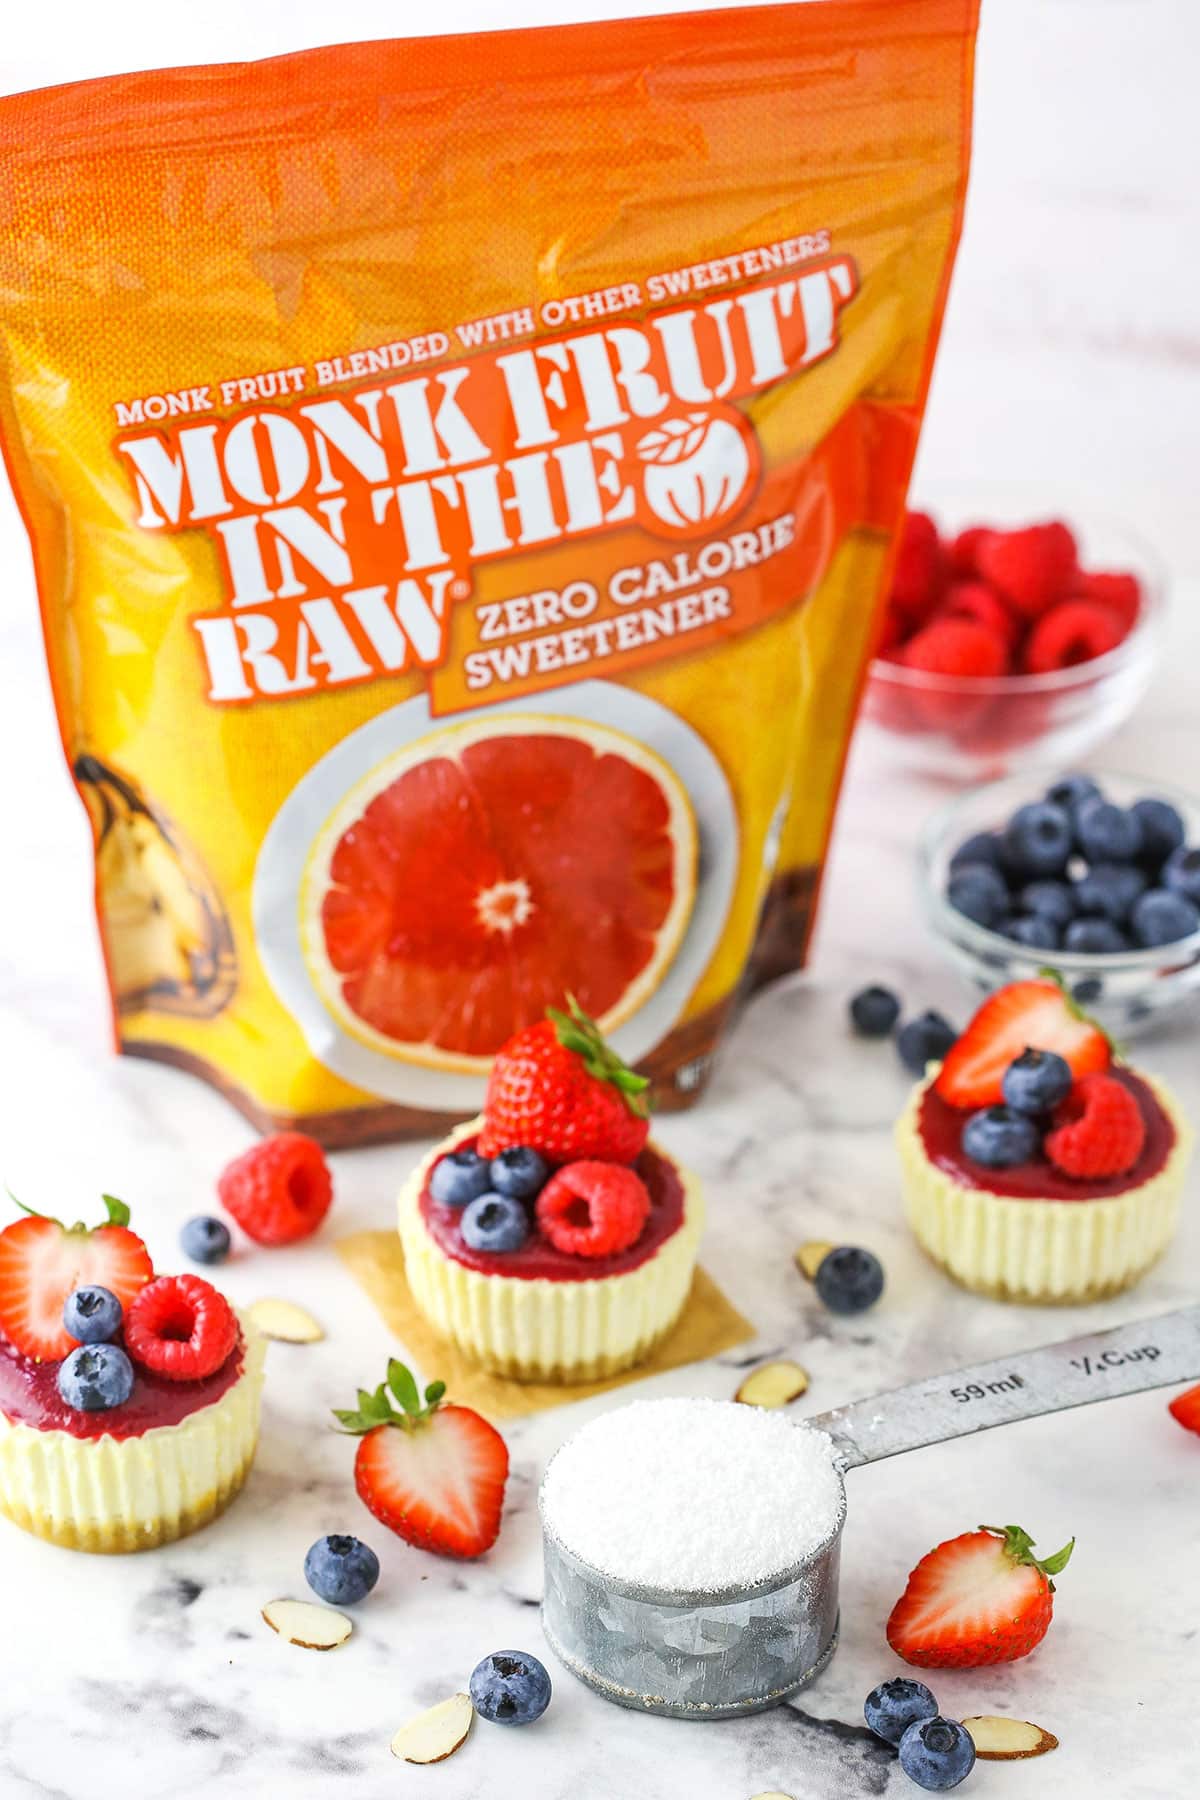 Three Mini Berry Almond Cheesecakes in front of a bag of Monk Fruit In The Raw sweetener